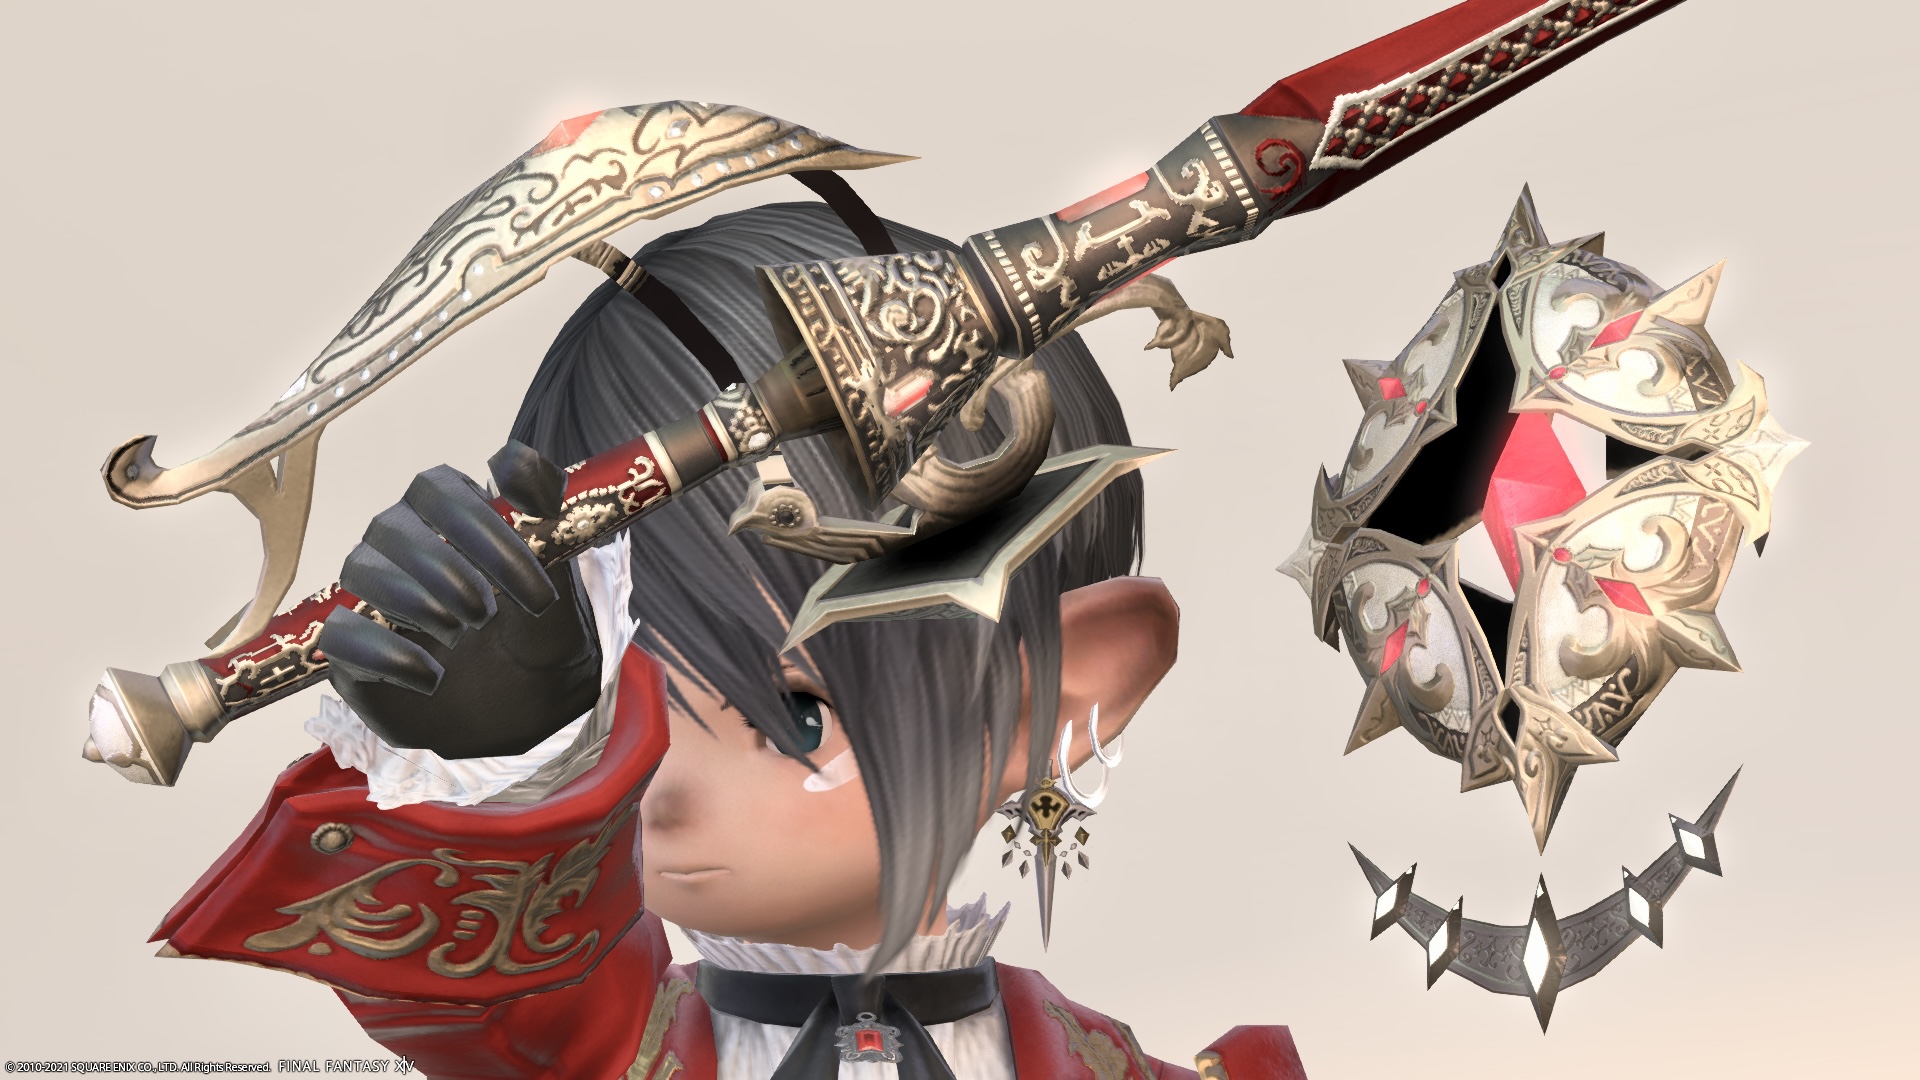 mage AF4 weapon, gorgeous rapier “Aeneas” with the name of the ancient god | Note エオルゼア冒険記 in FF14